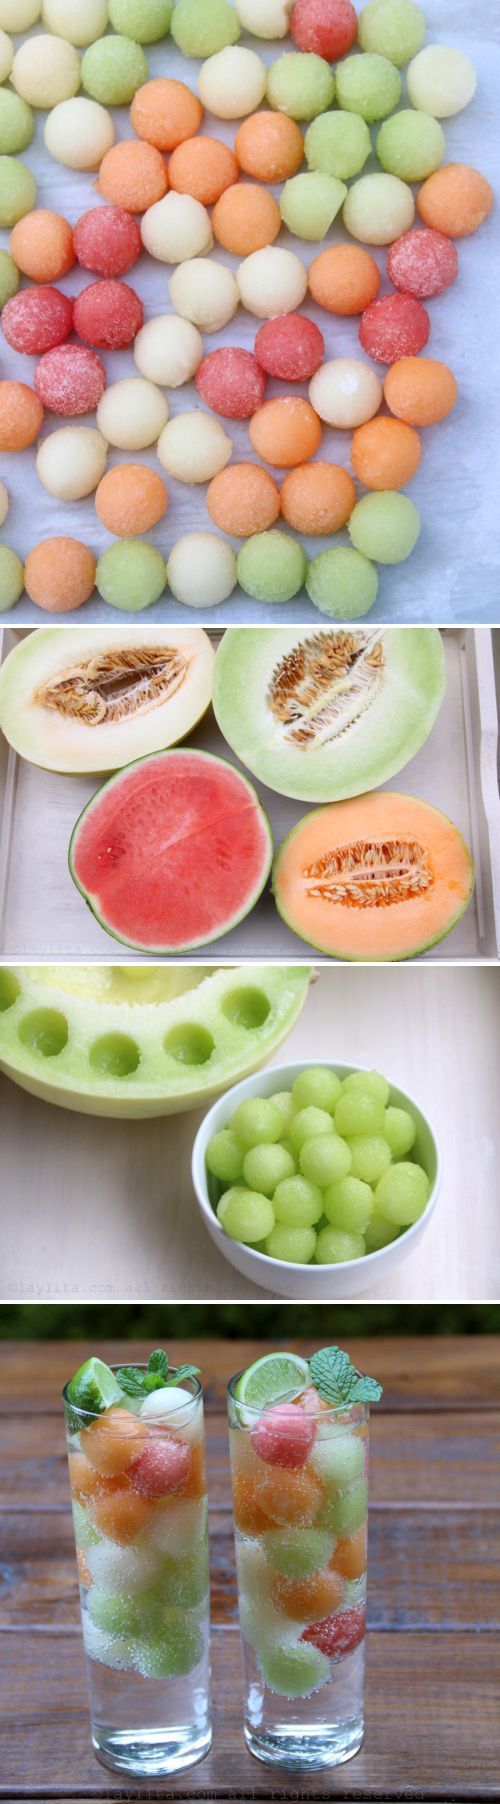 Melon “Ice Cubes” for summer!